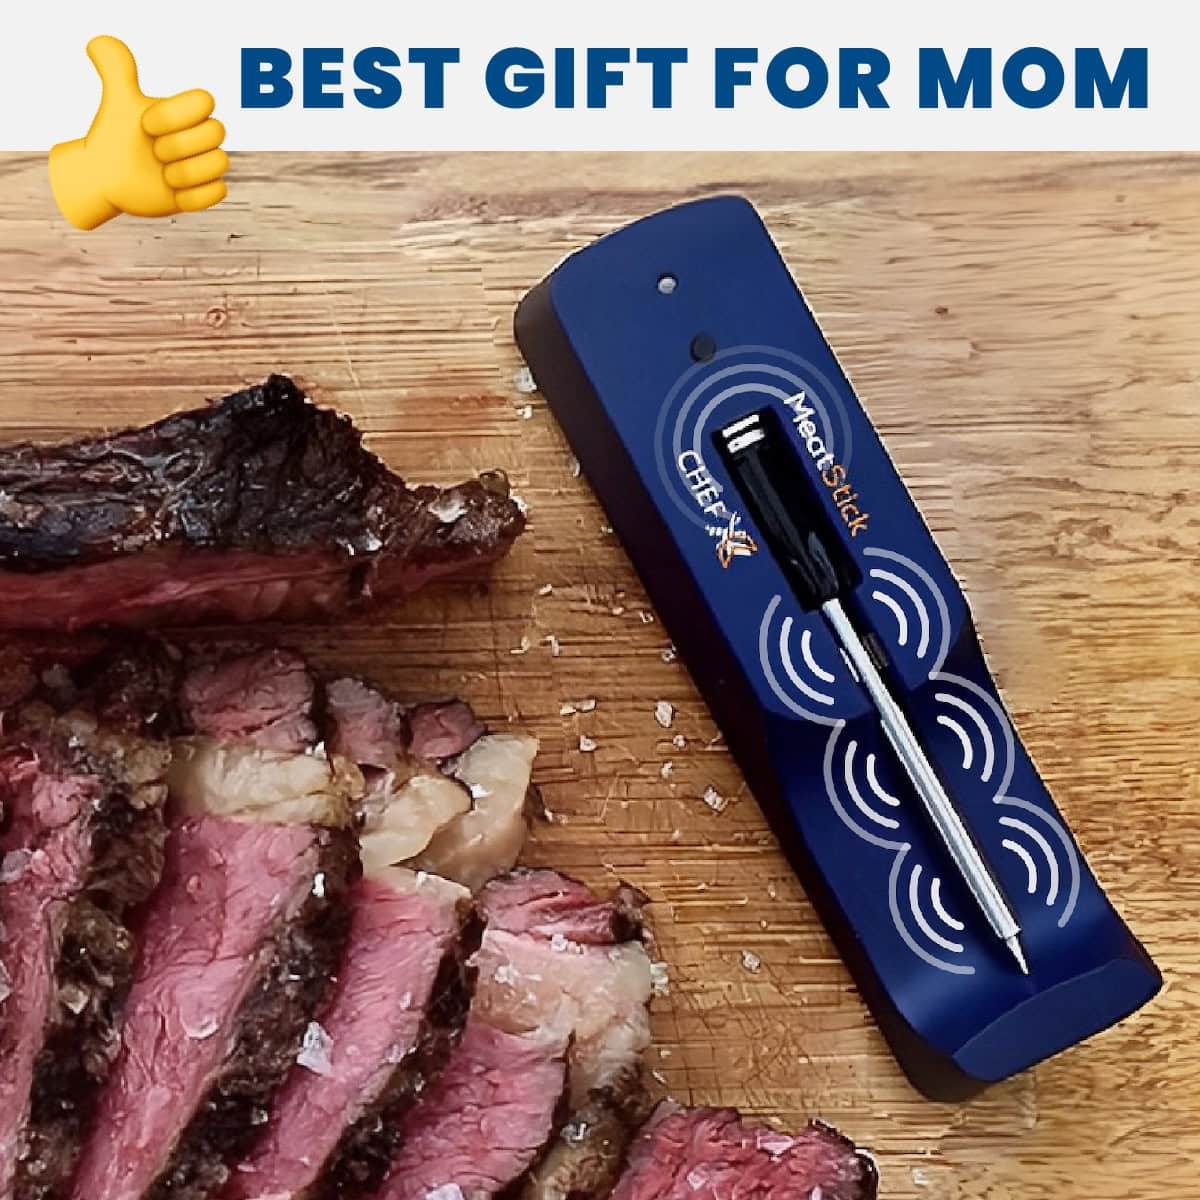 MeatStick Chef X Wireless Meat Thermometer - Ultimate Mother's Day Gift for Chef Moms. Smart Kitchen Gadget for Pro-Level Protein Cooking Mastery at Home.